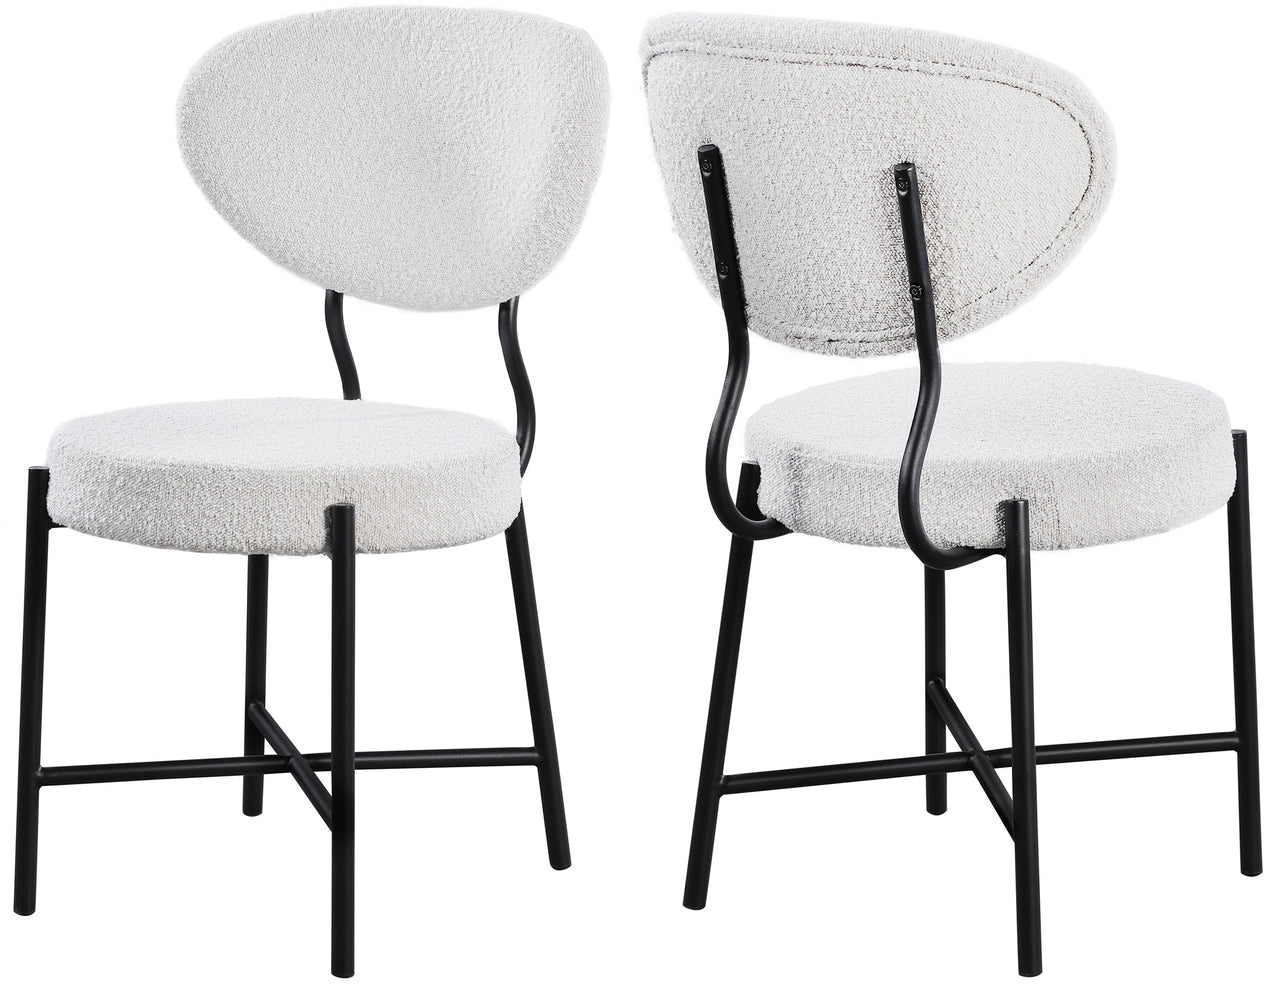 Allure Cream Boucle Fabric Dining Chair image